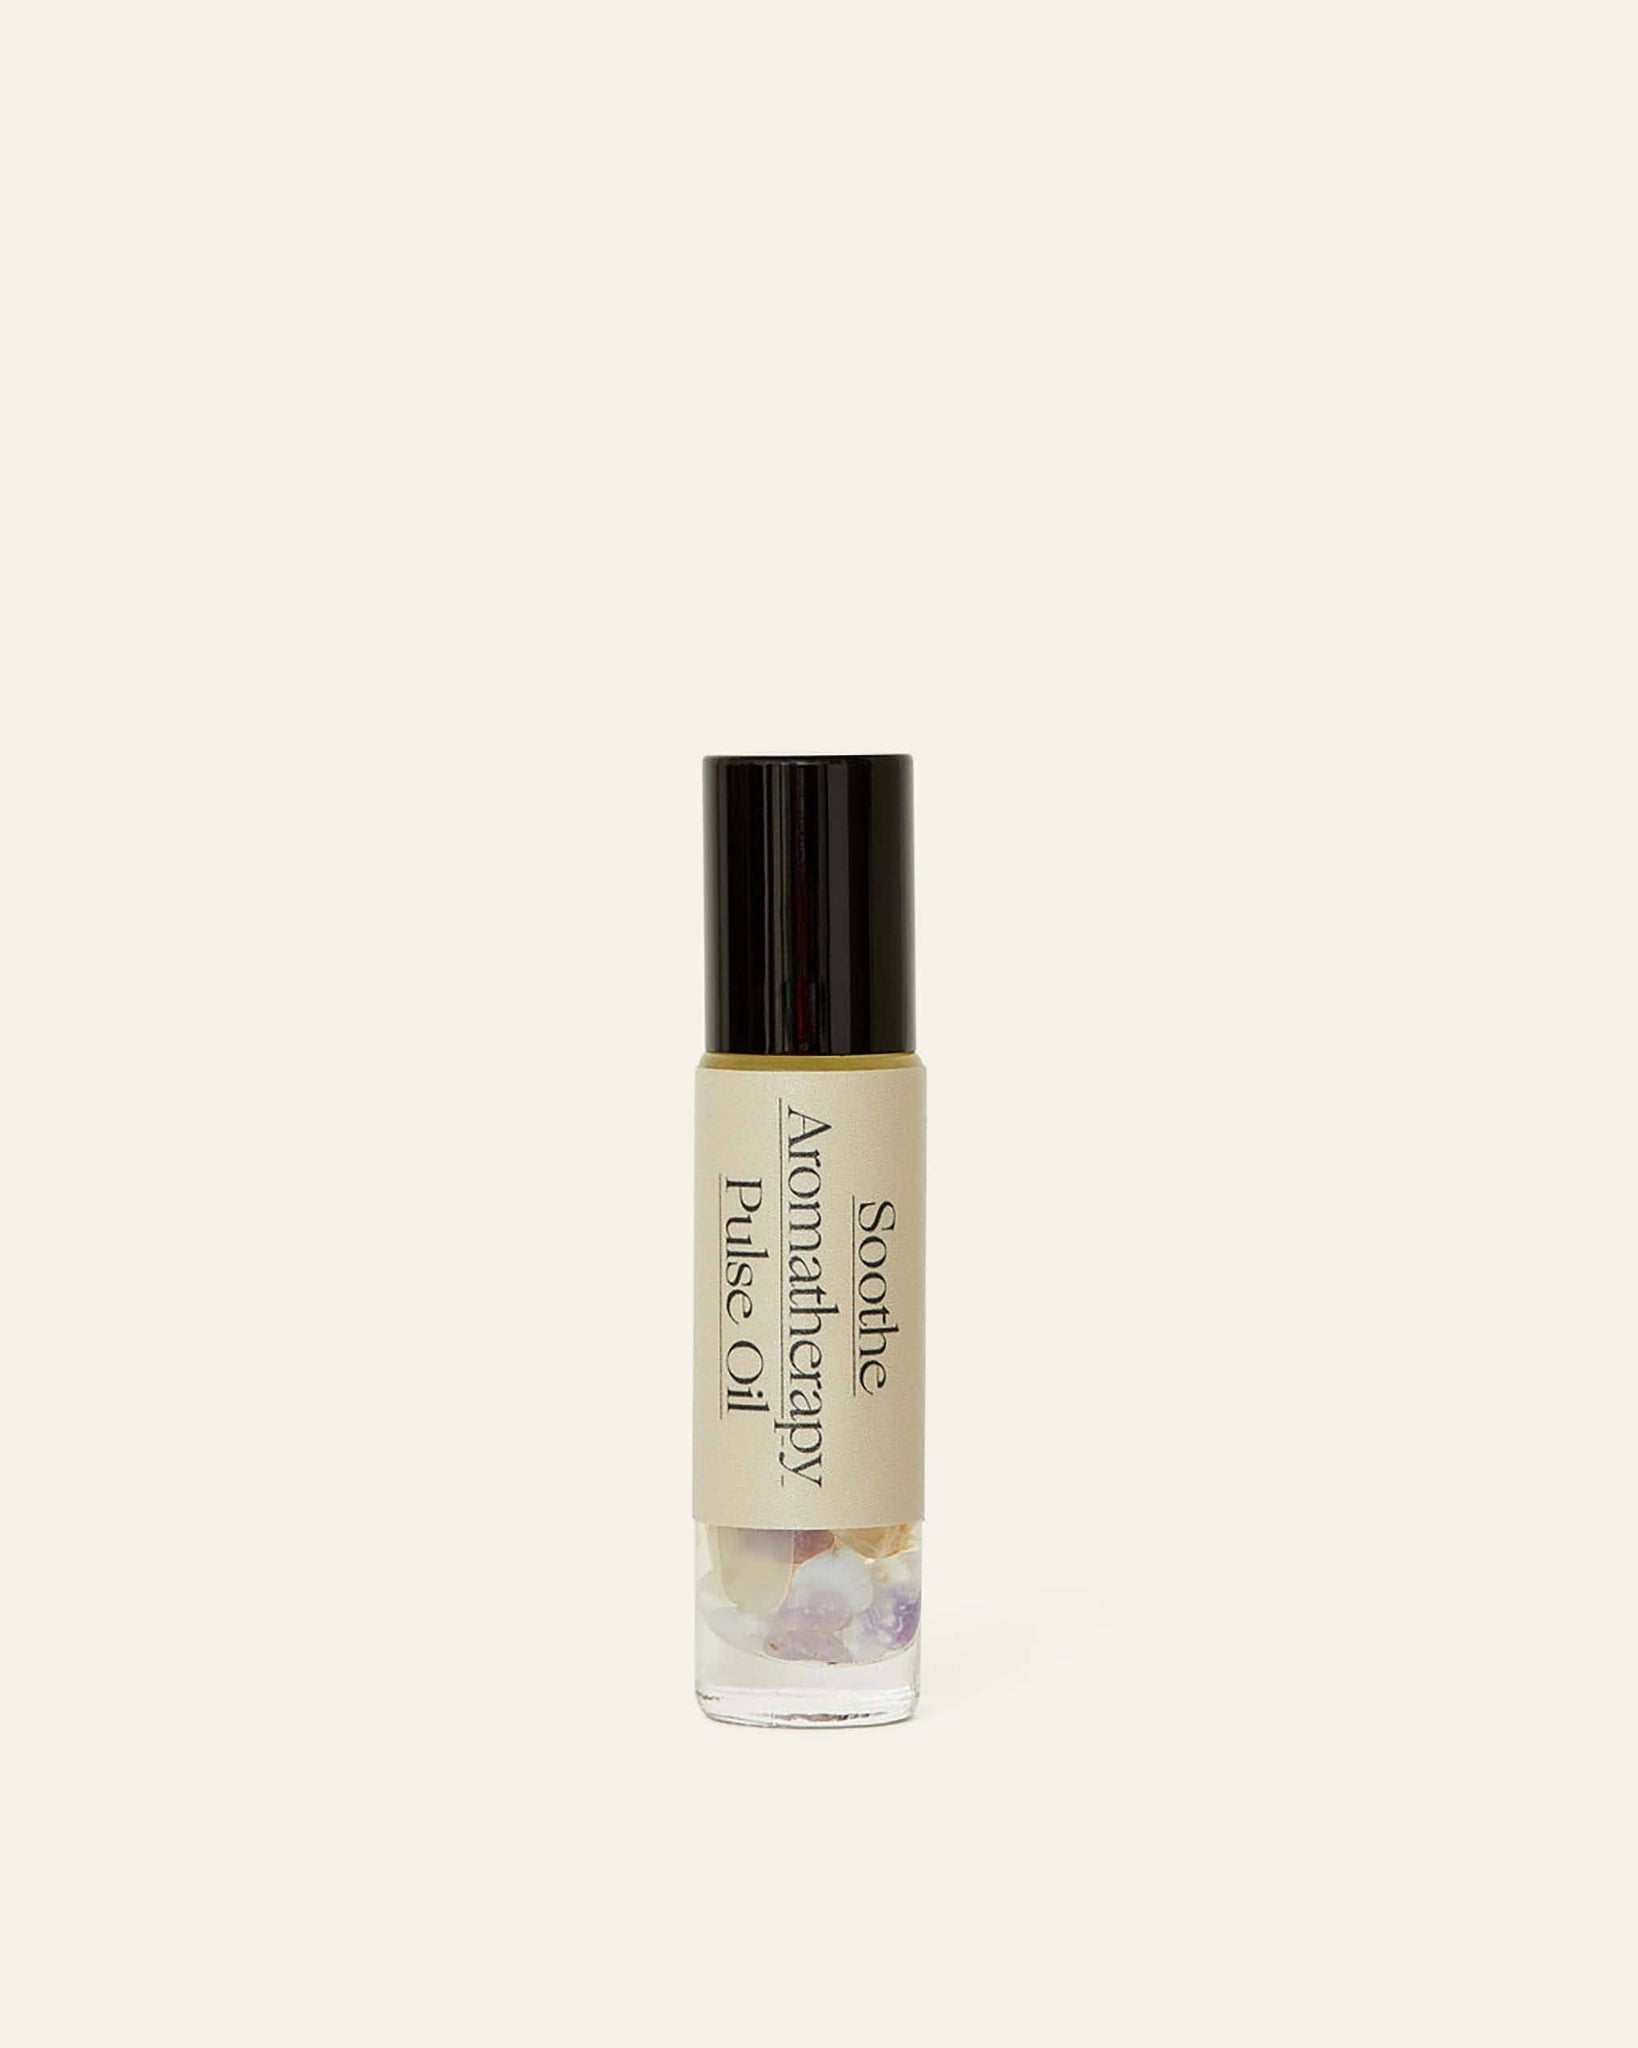 Aromatherapy Pulse Oil, Soothe